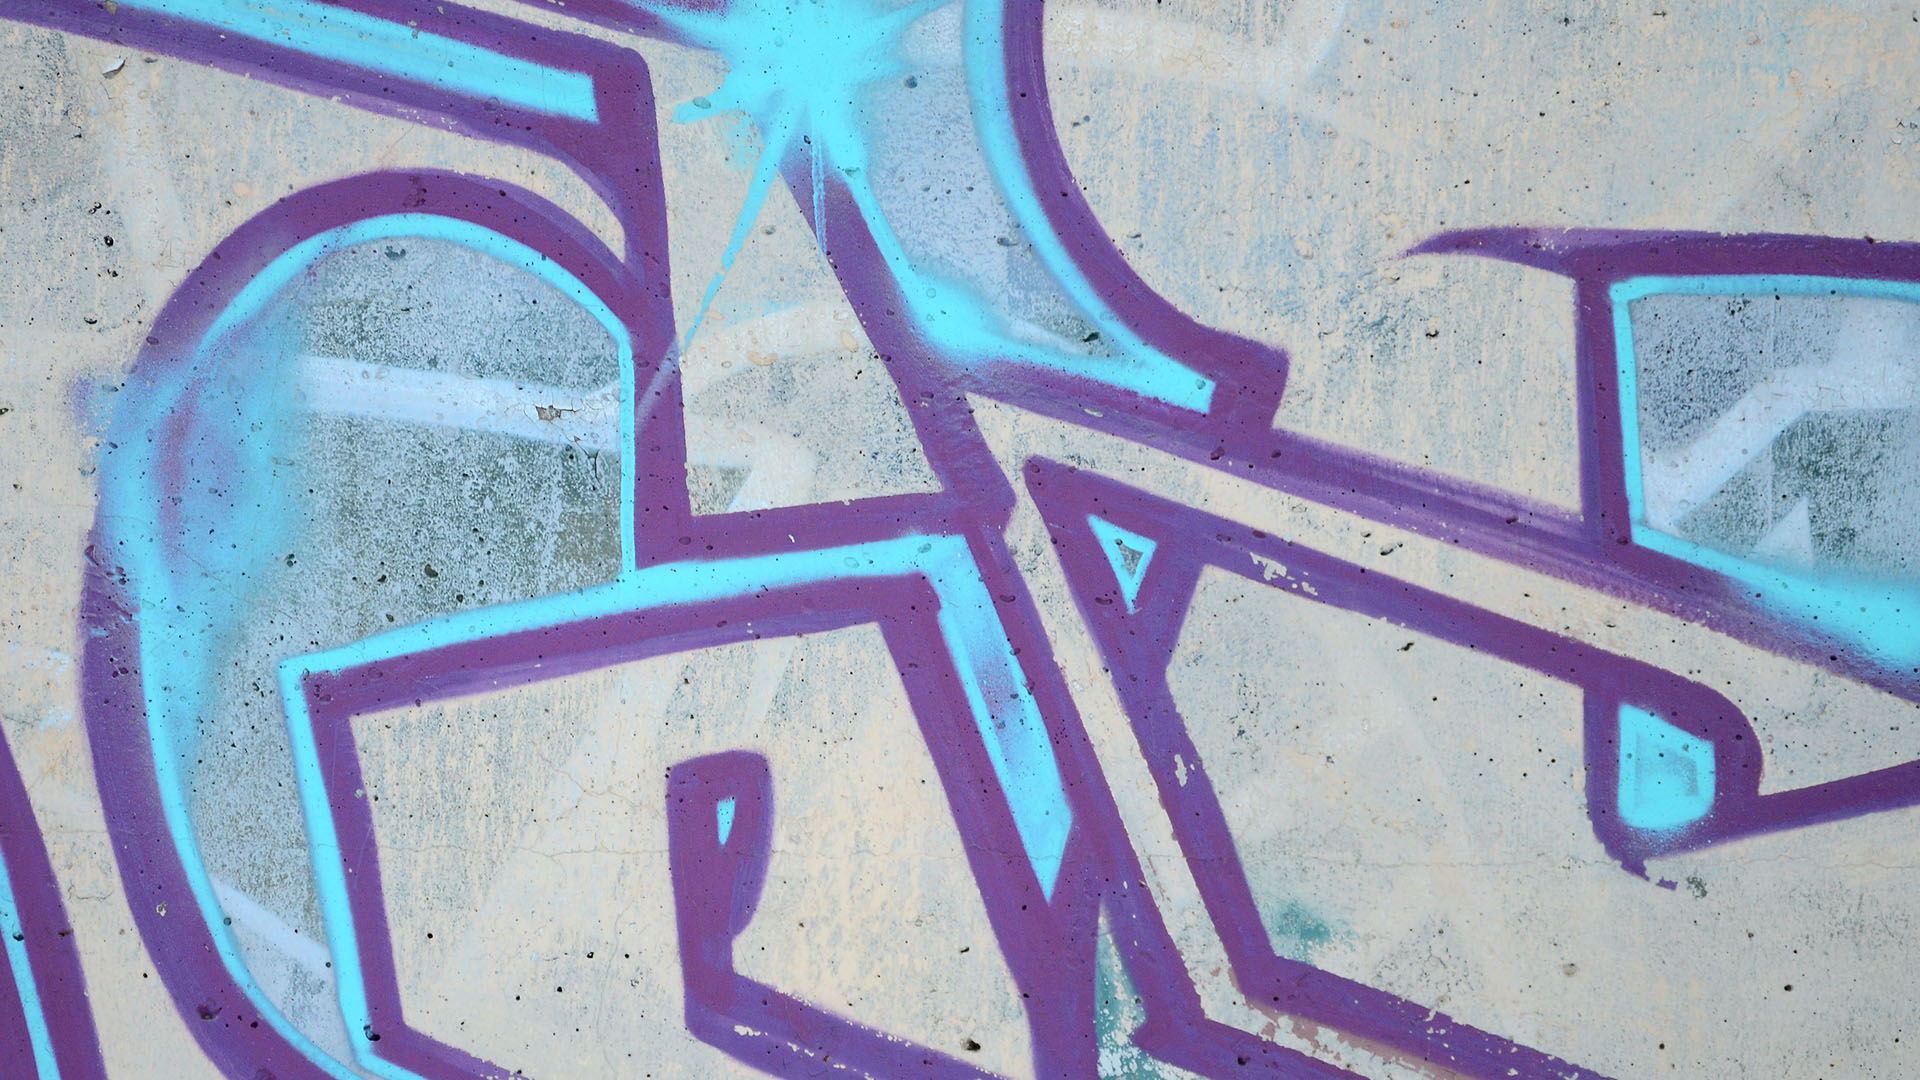 HELP US CLEAN TULSA WITH OUR GRAFFITI REMOVAL SERVICES